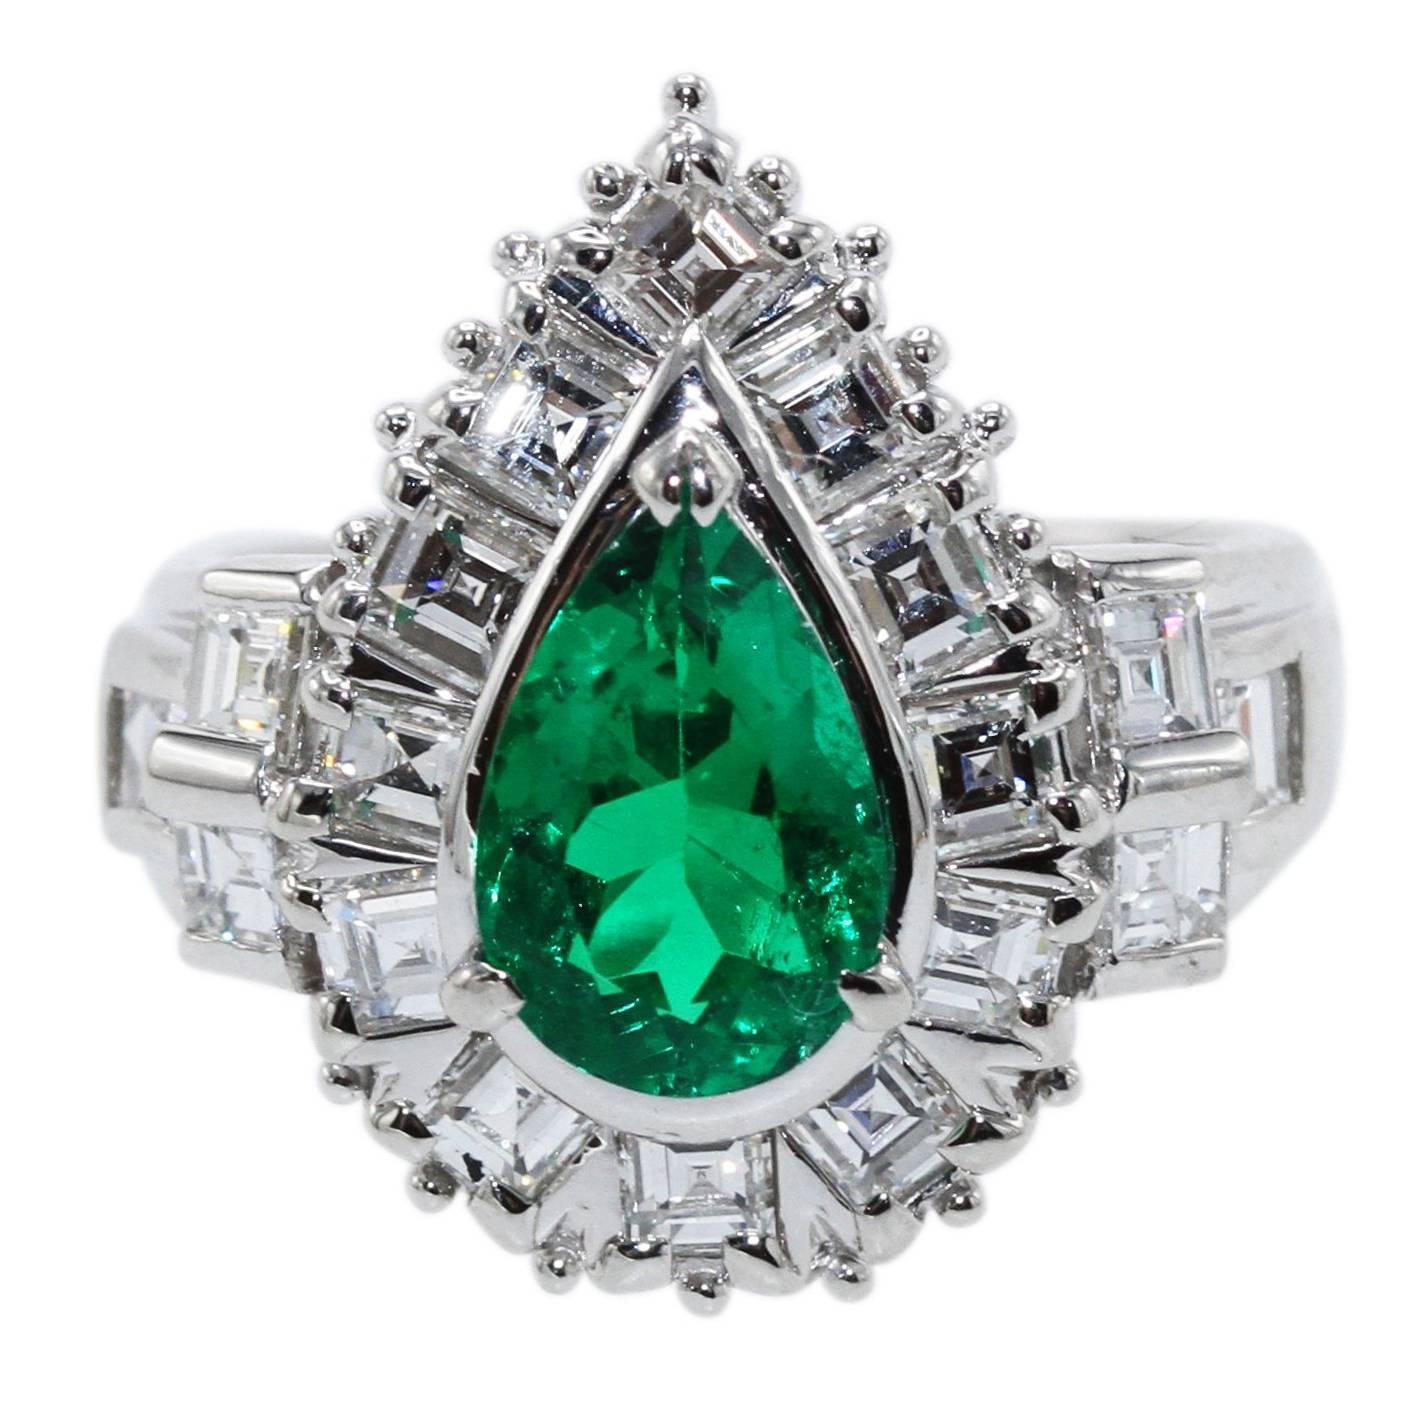 GIA Certified 1.52 Carat Emerald and Diamond Ring